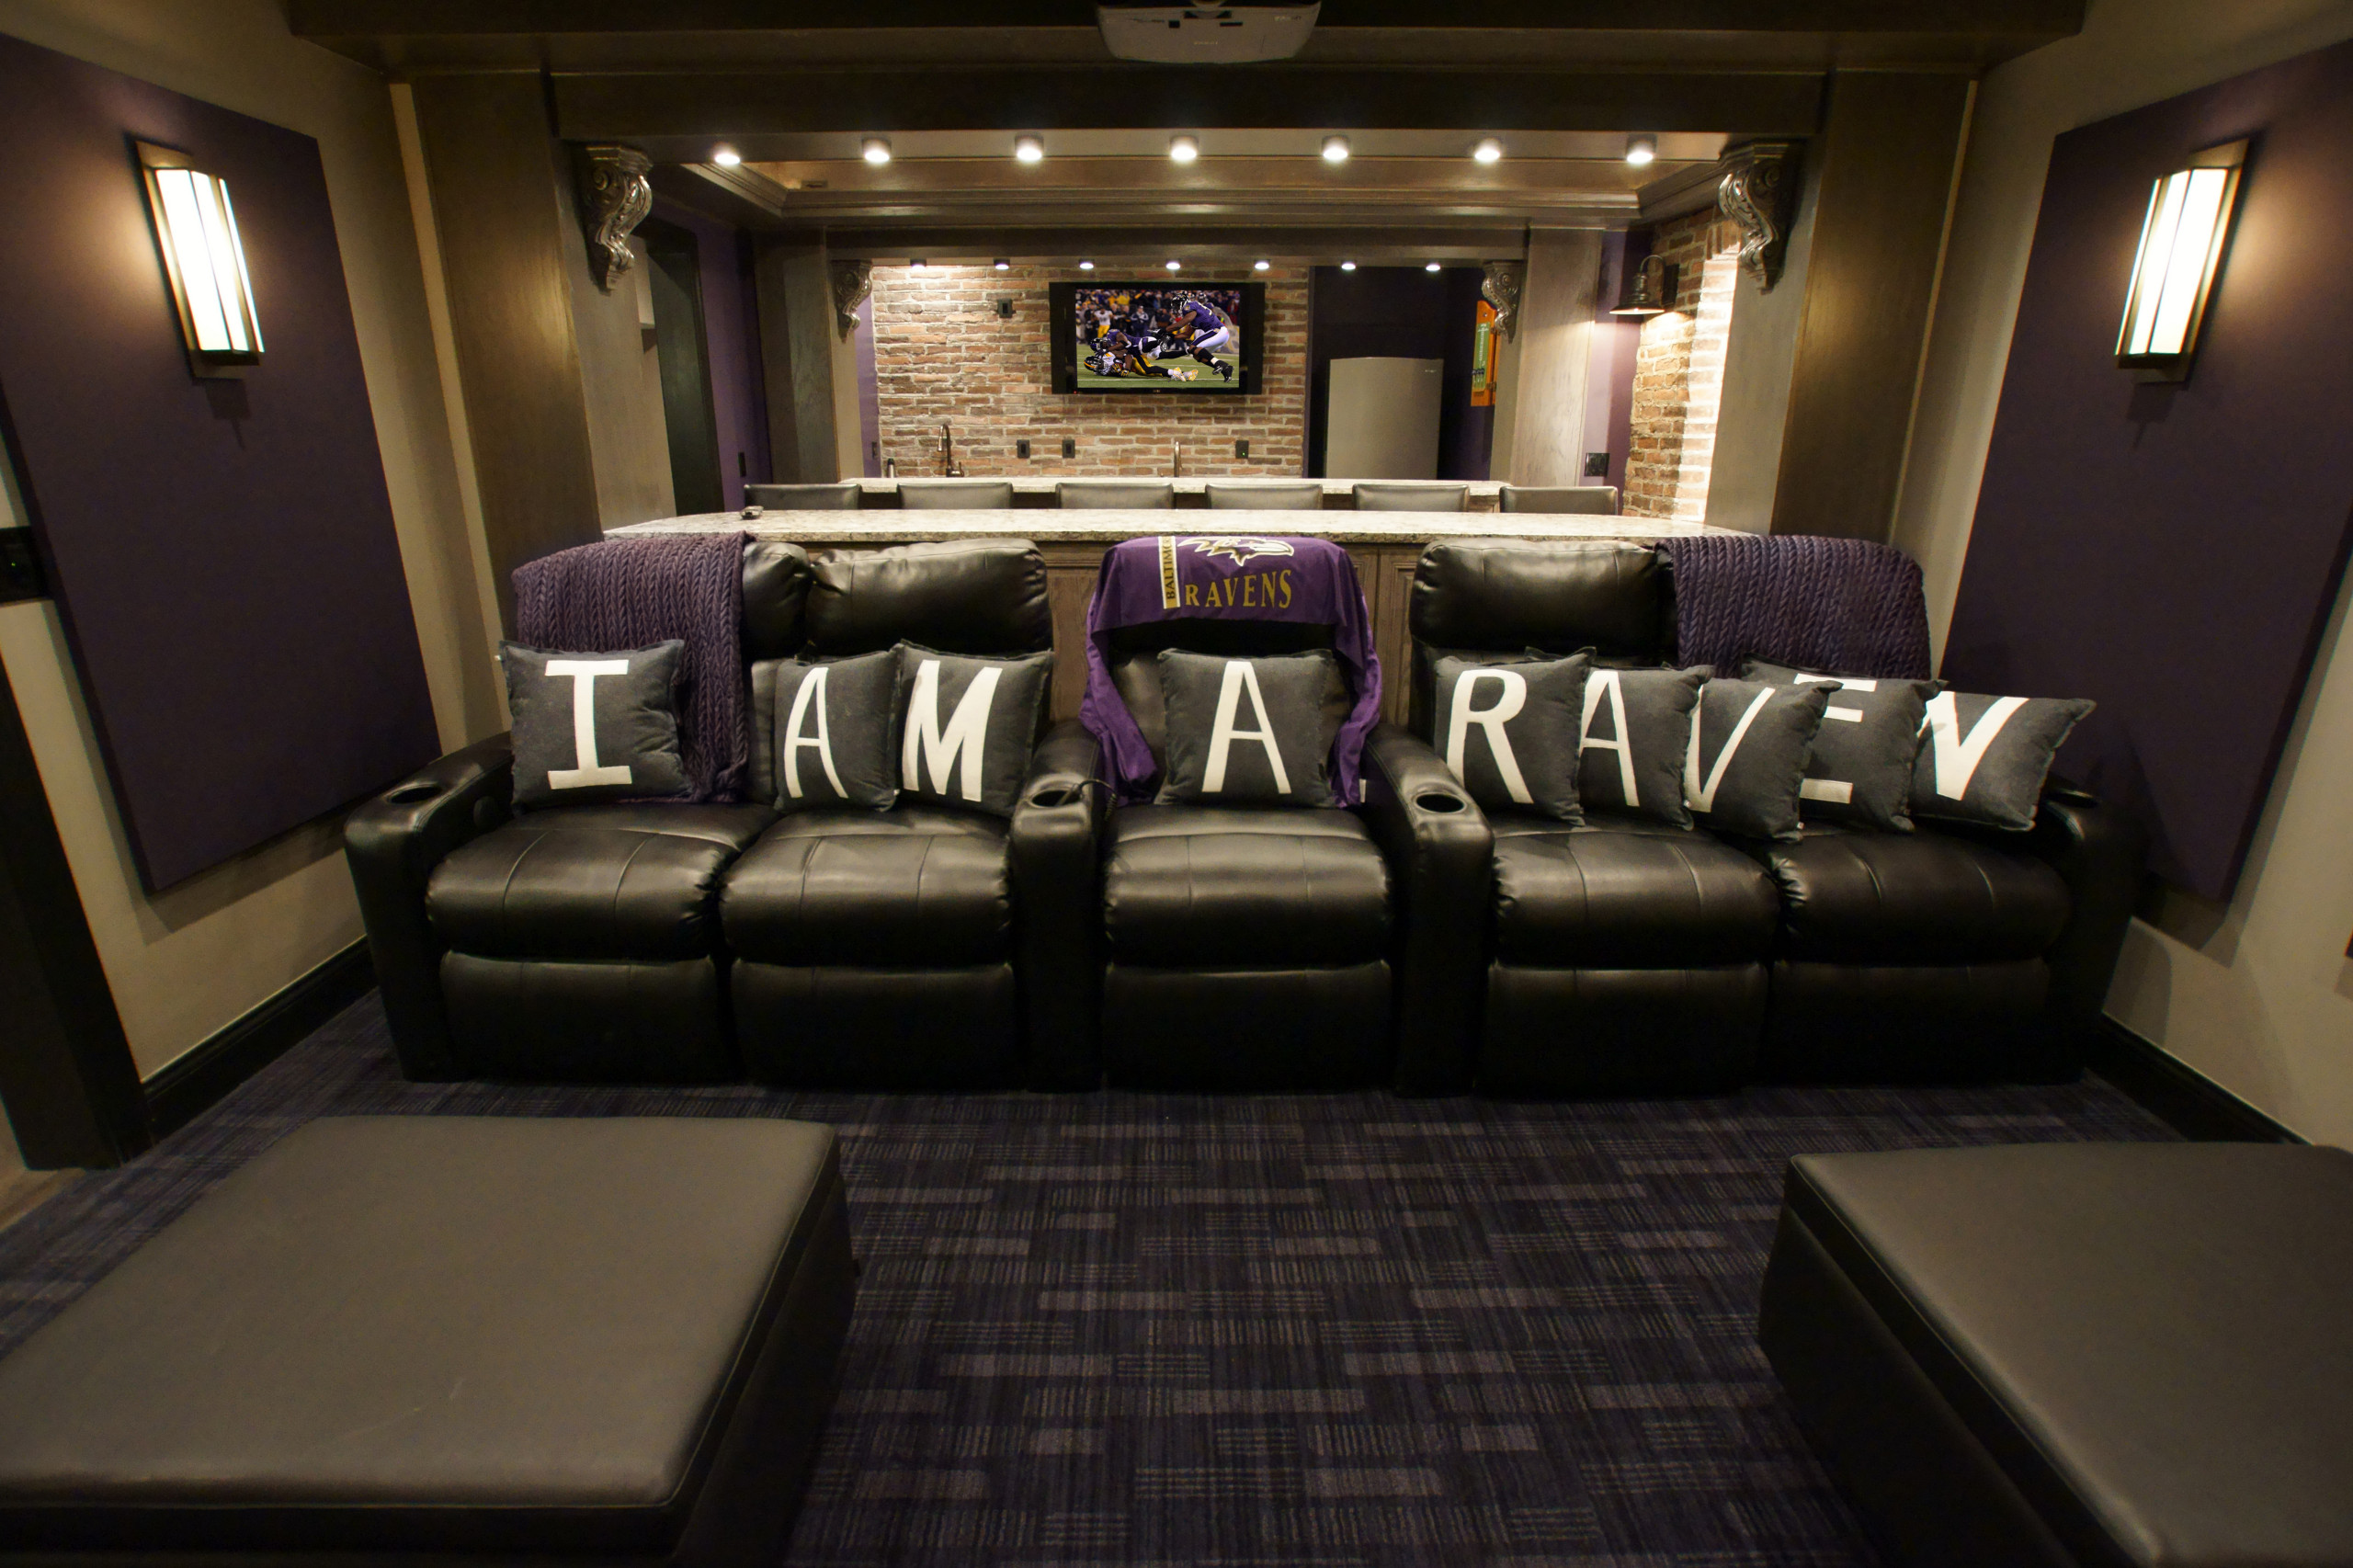 75 Beautiful Home Theater With A Wall Mounted Tv Pictures Ideas November 2021 Houzz - Home Theater Wall Decor Ideas